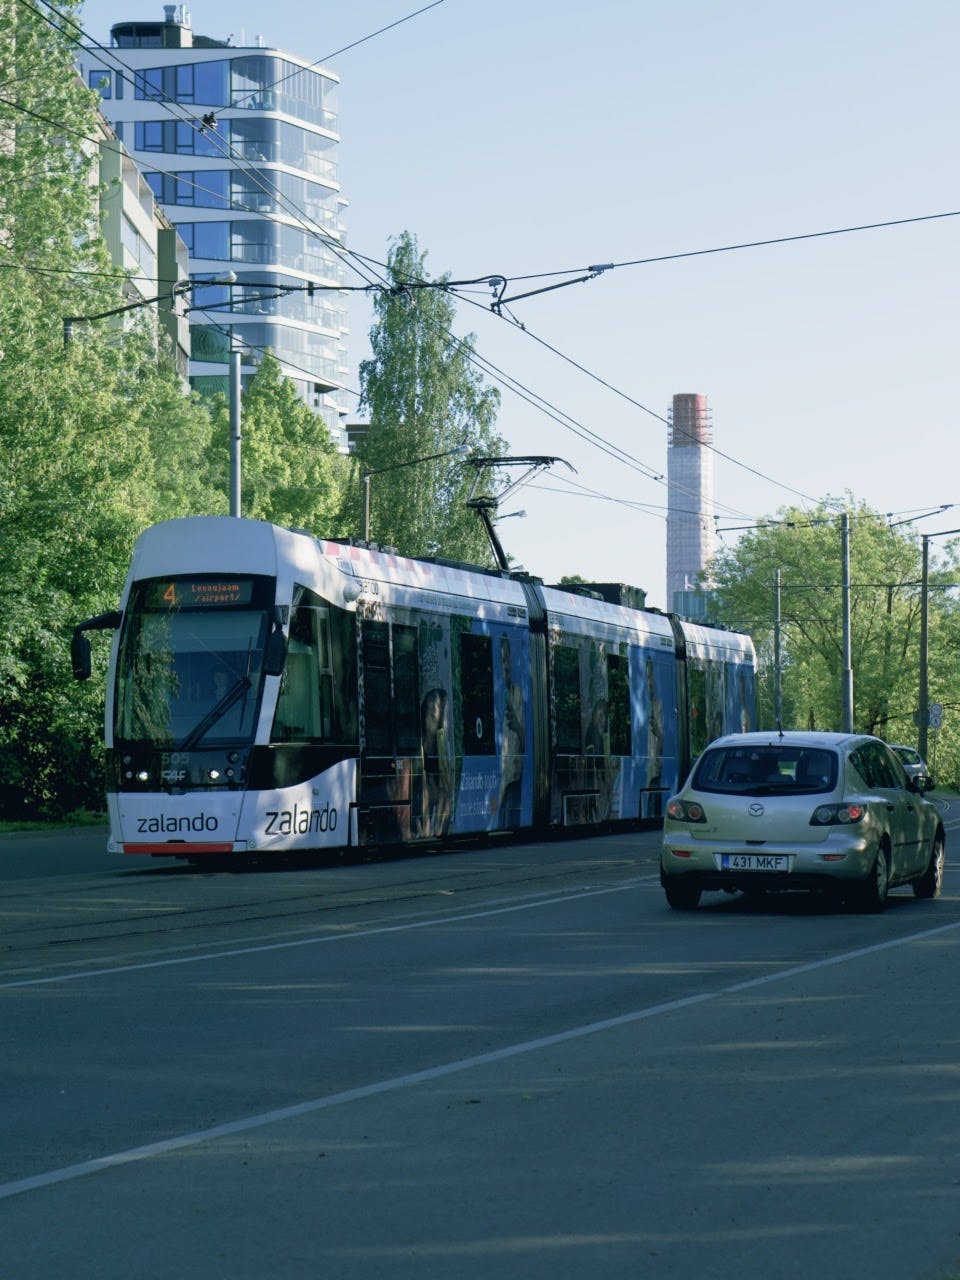 Tram line 4 is heading to the airport in Majaka area, Tallinn.